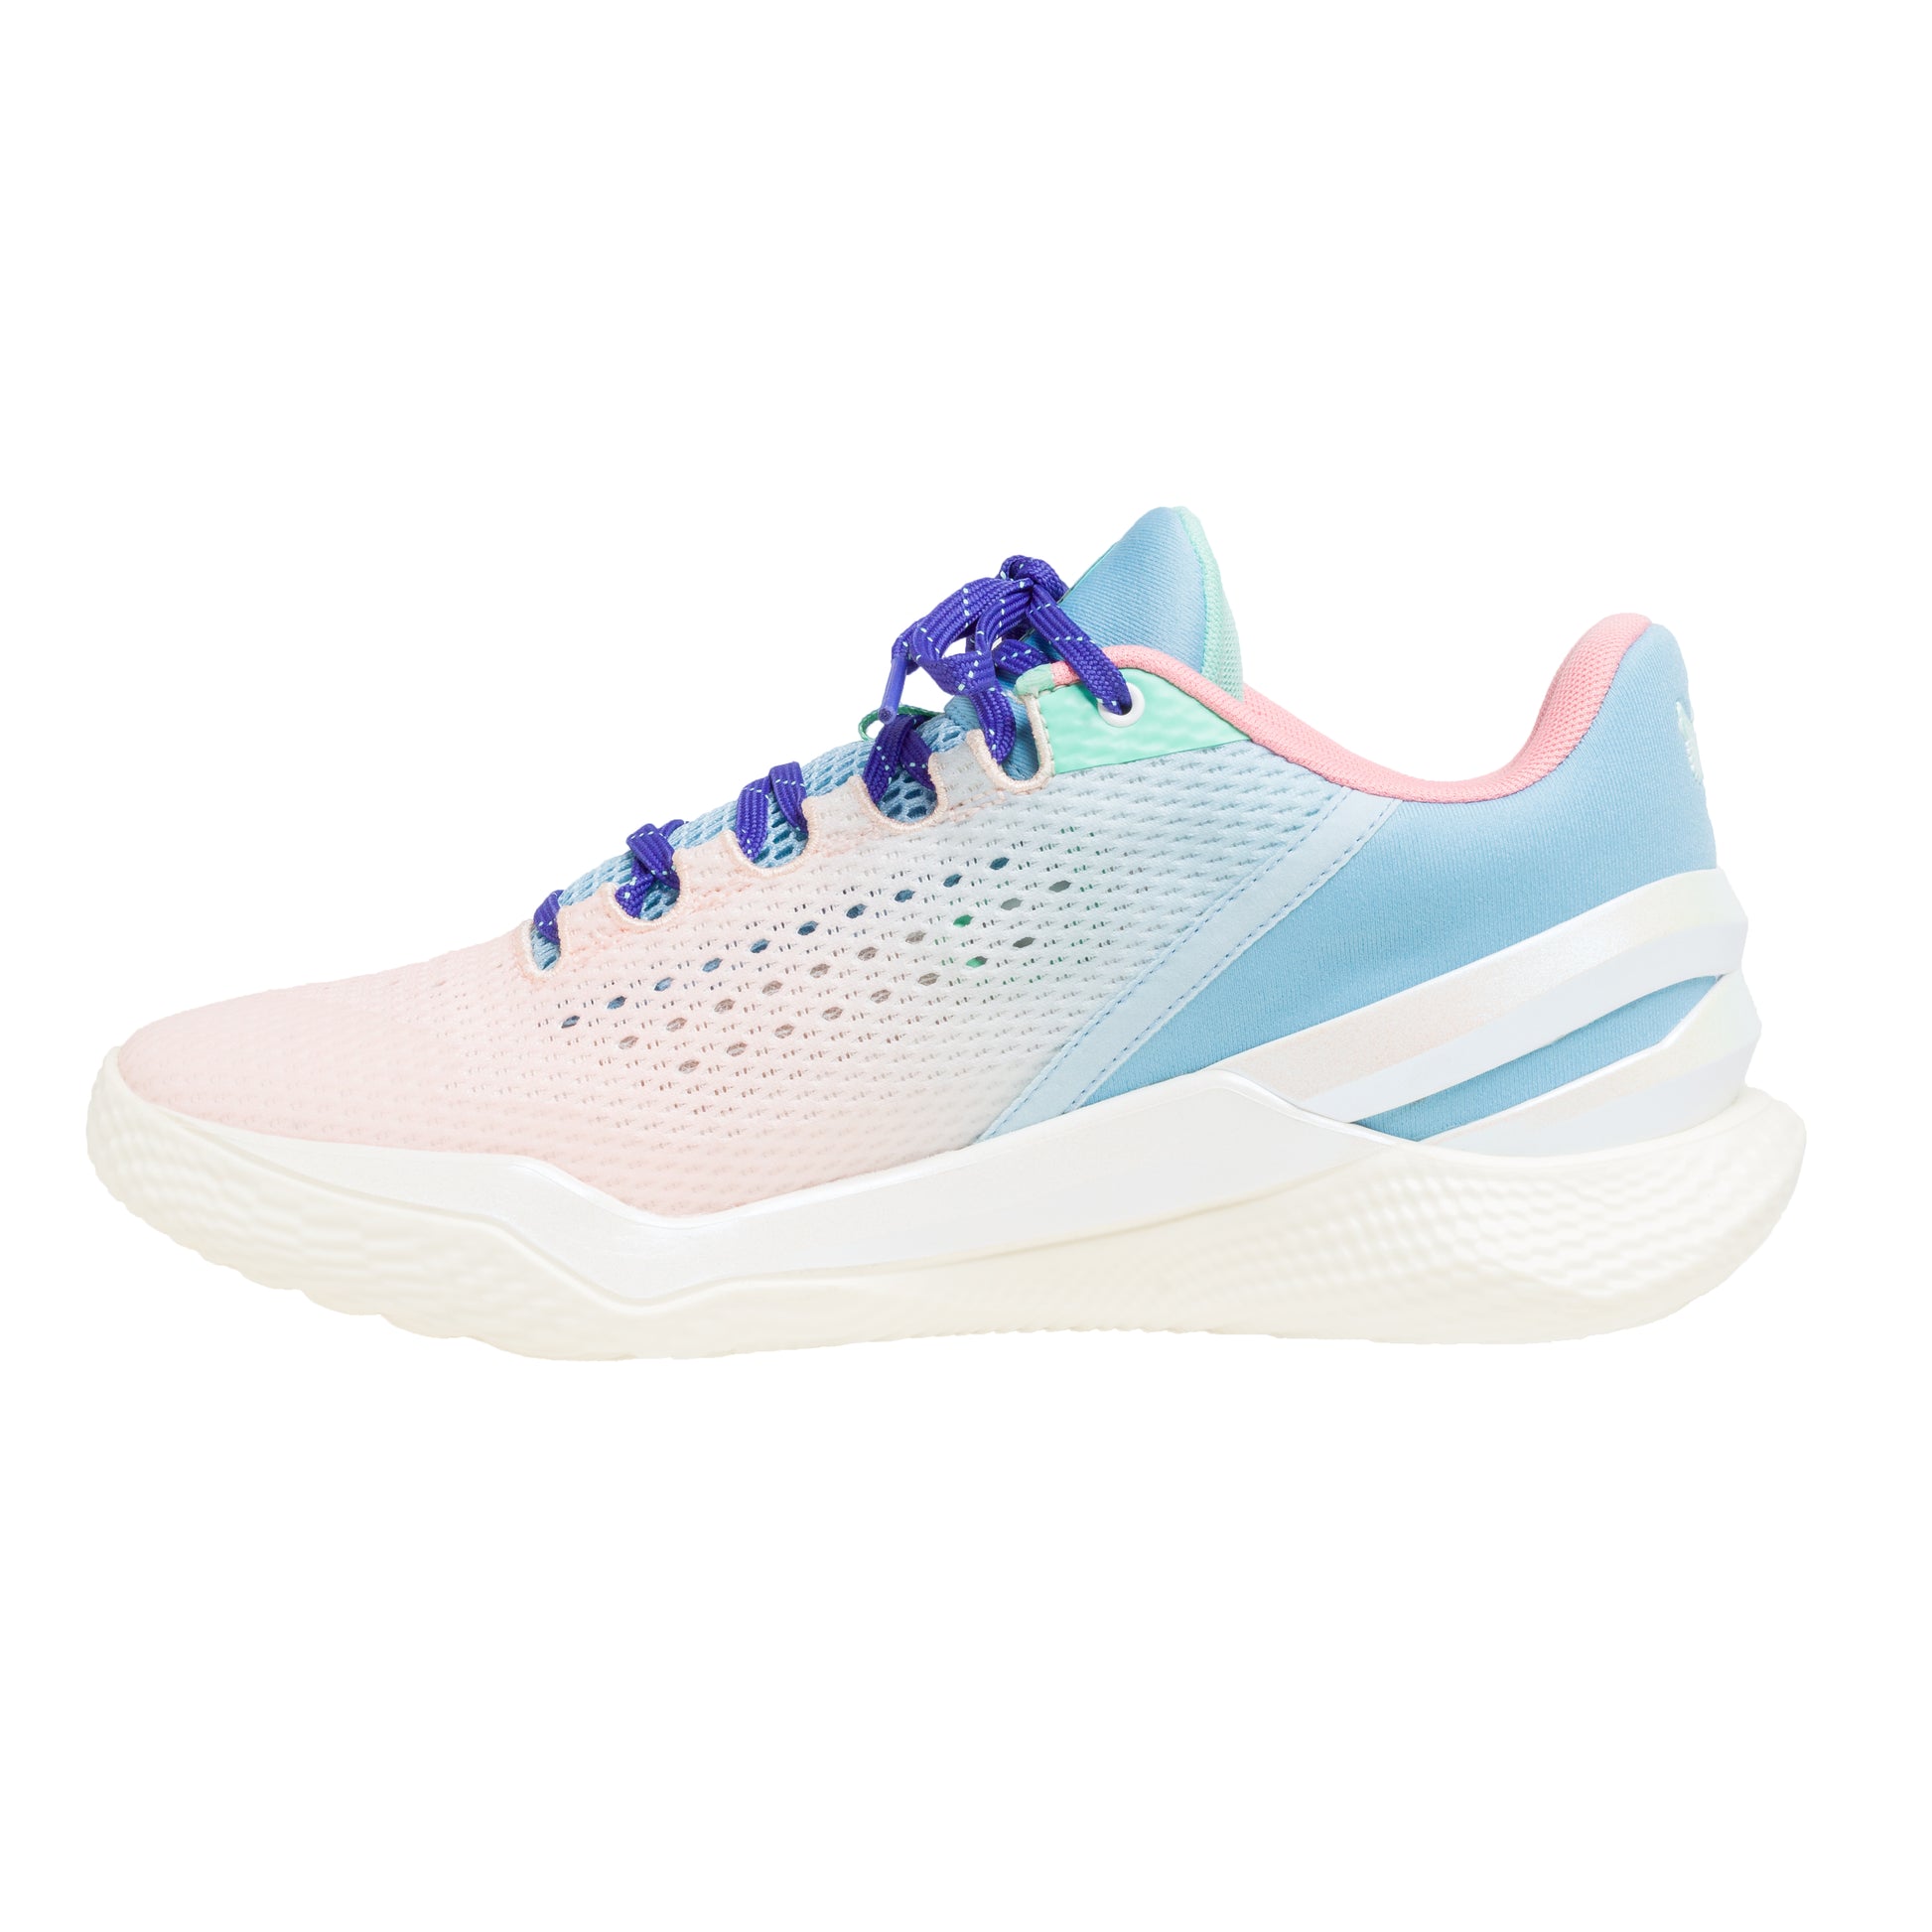 Curry 2 FloTro Low – Leaders 1354